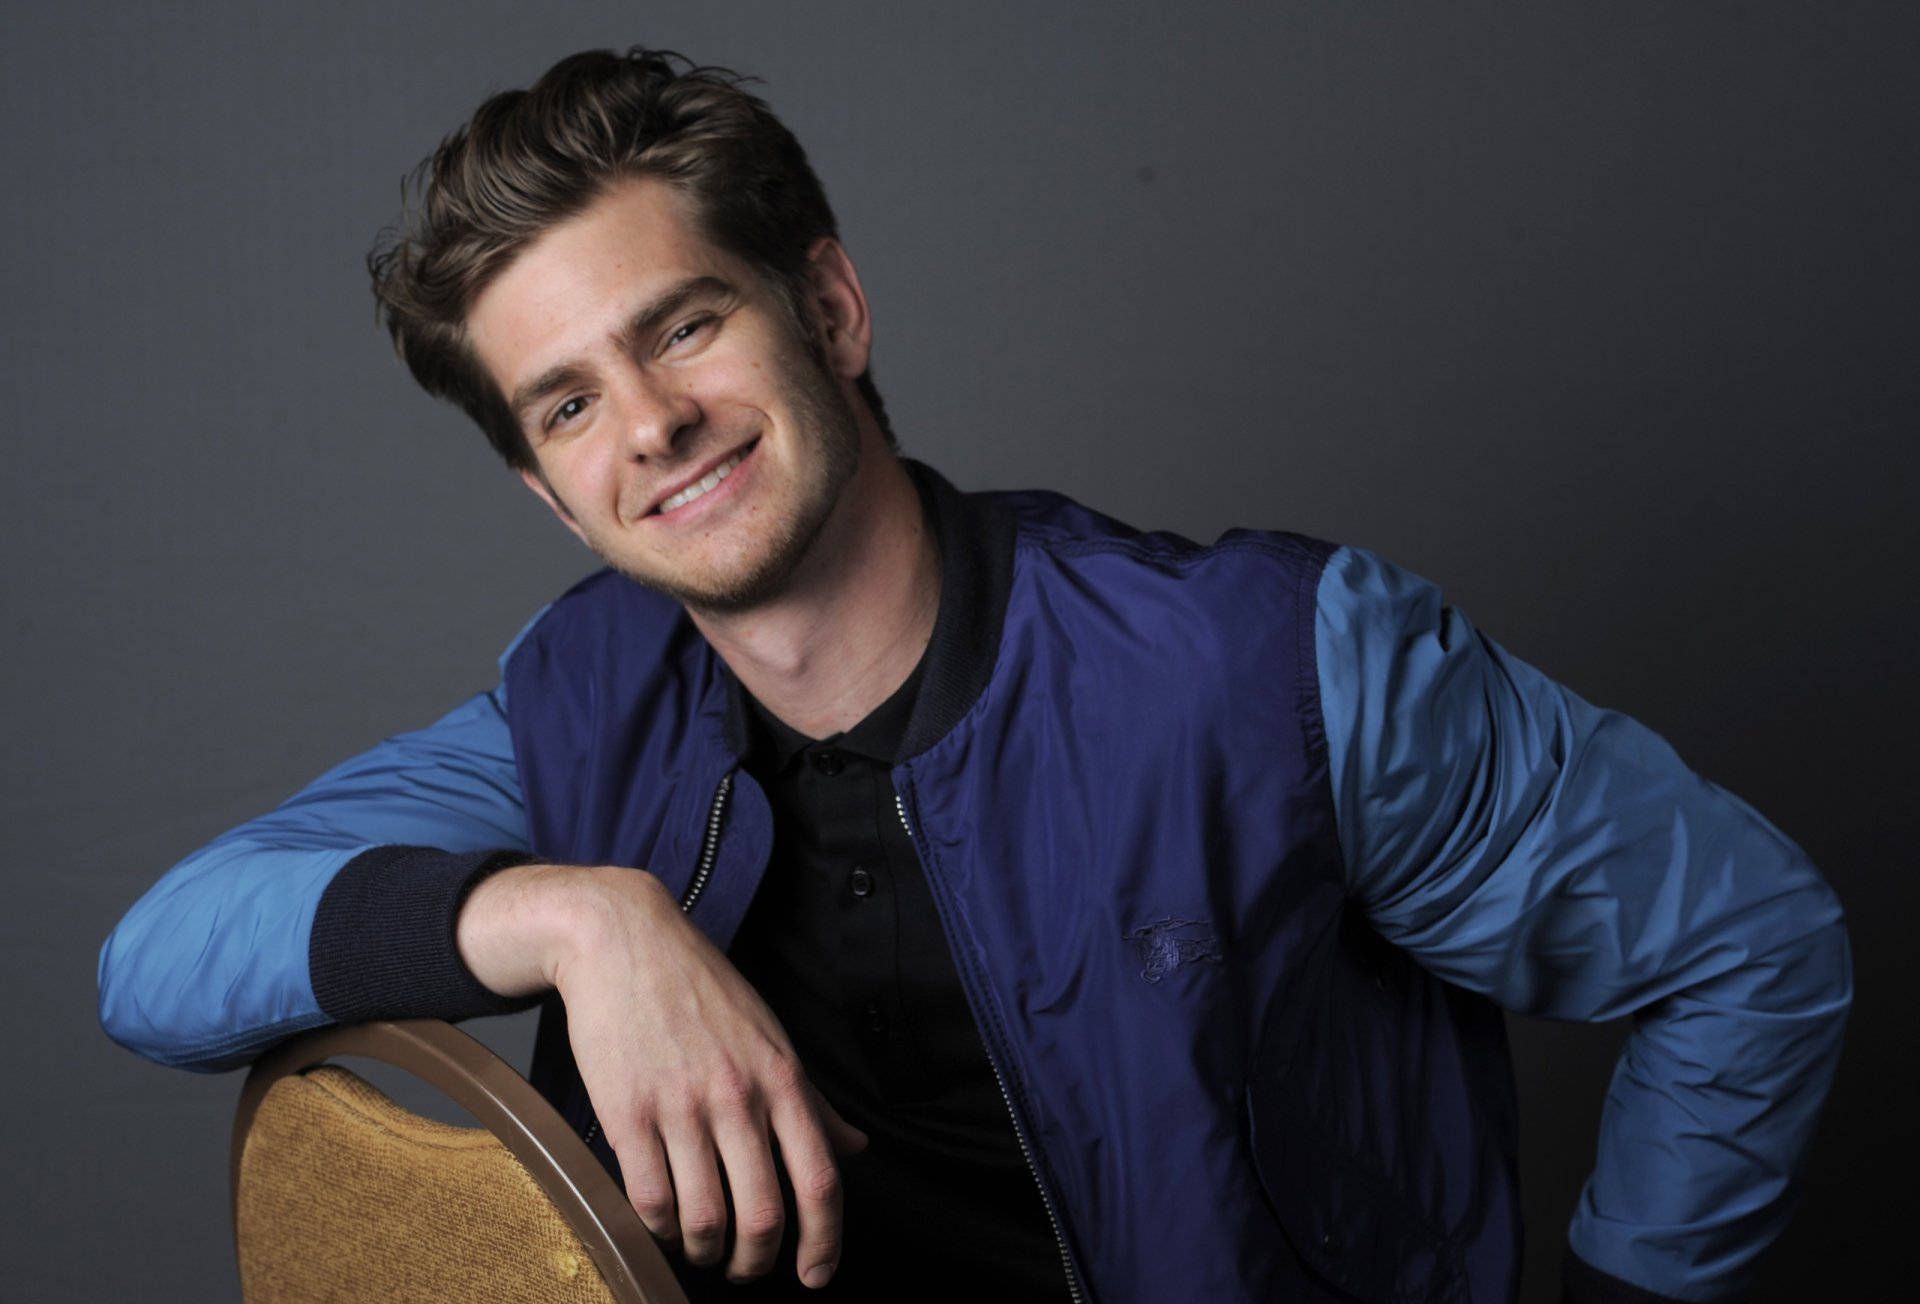 Andrew Garfield has a role in the new 'Spider-Man' movie - Andrew Garfield